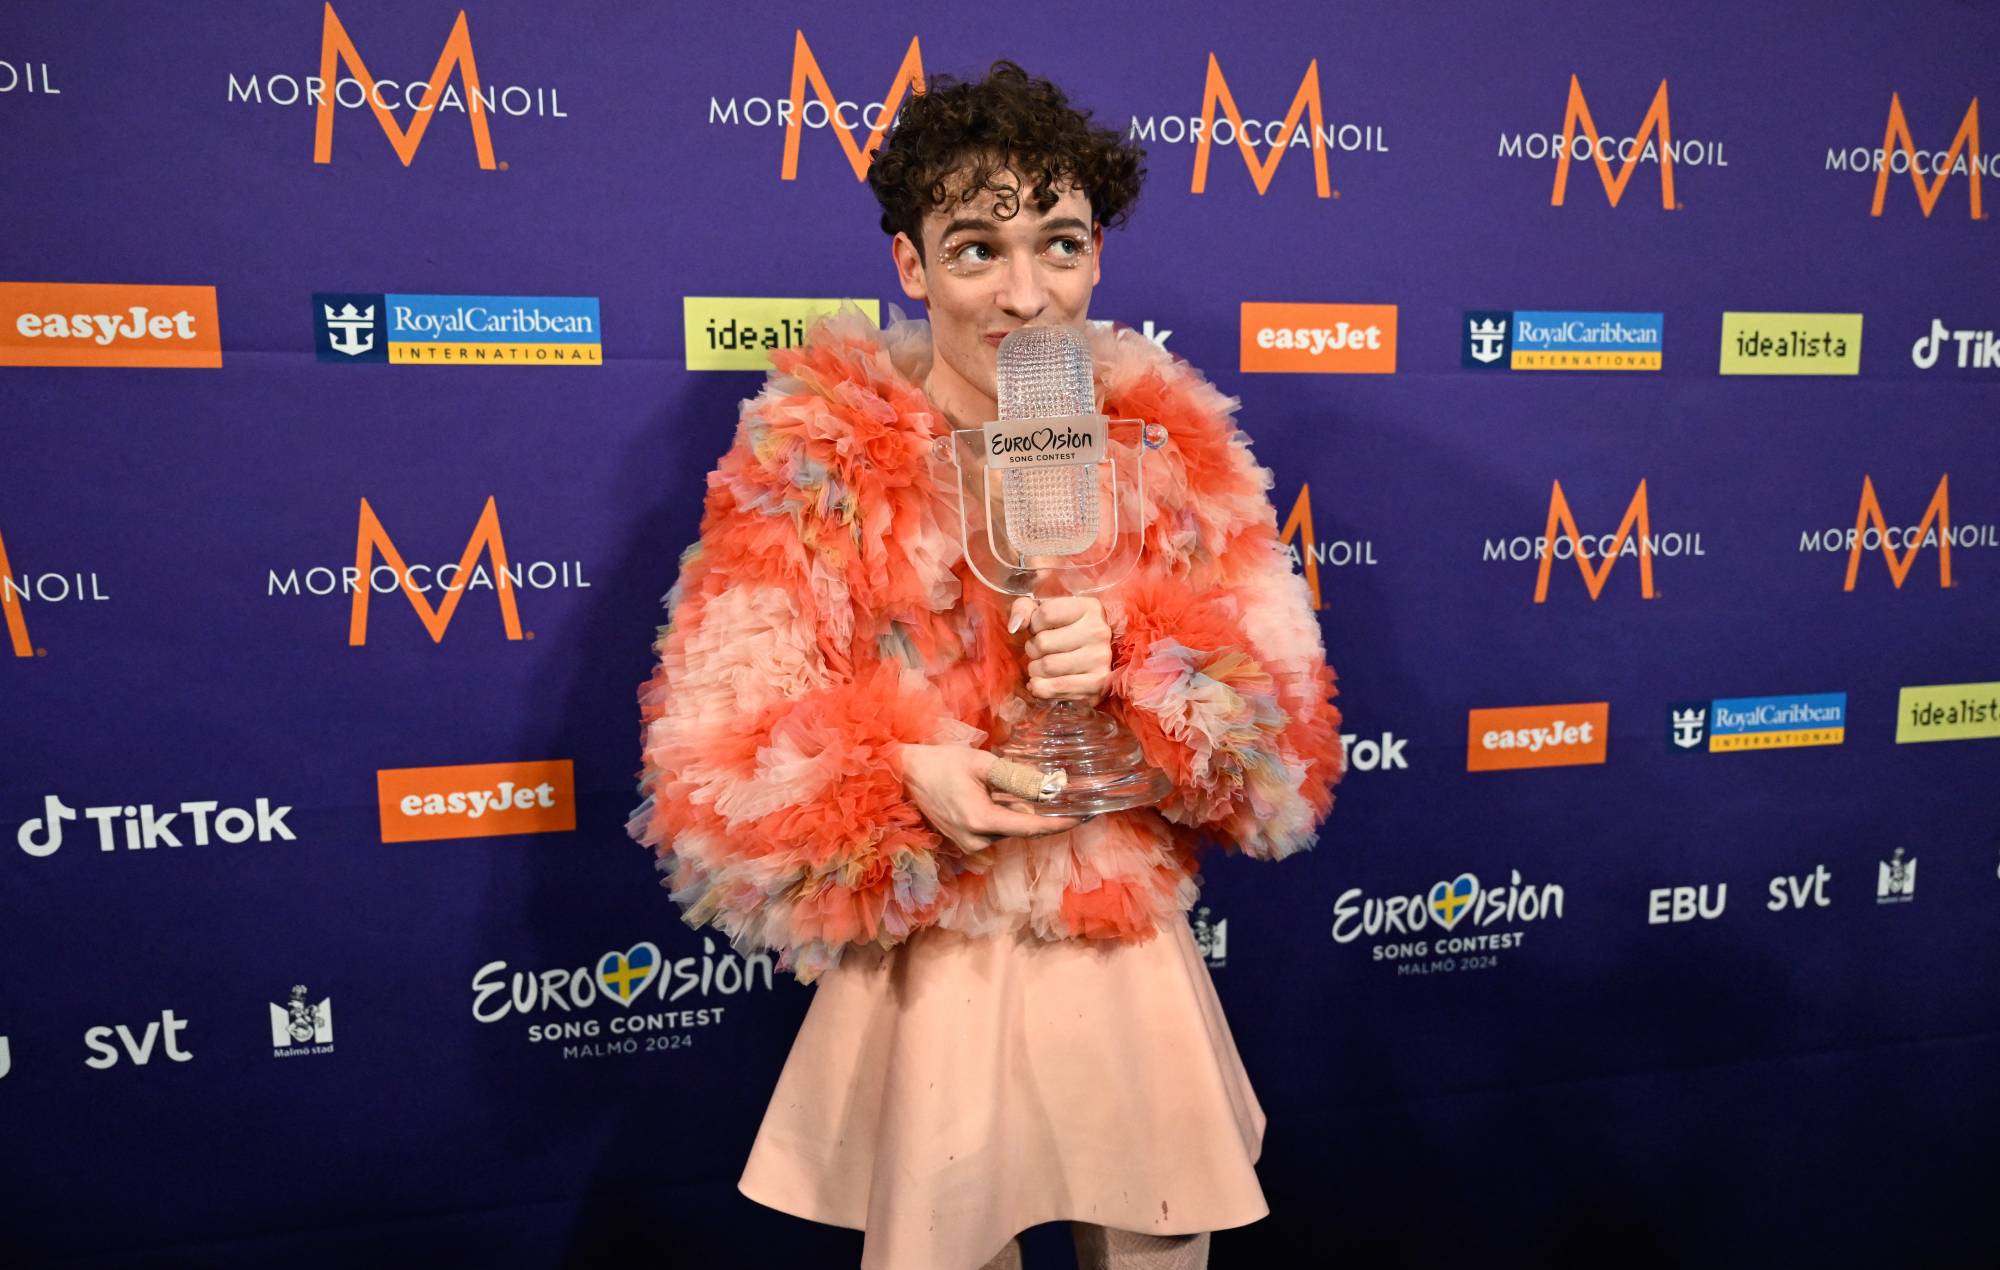 Eurovision bosses promise to review all incidents for those who "didn’t respect the spirit of the rules and the competition"